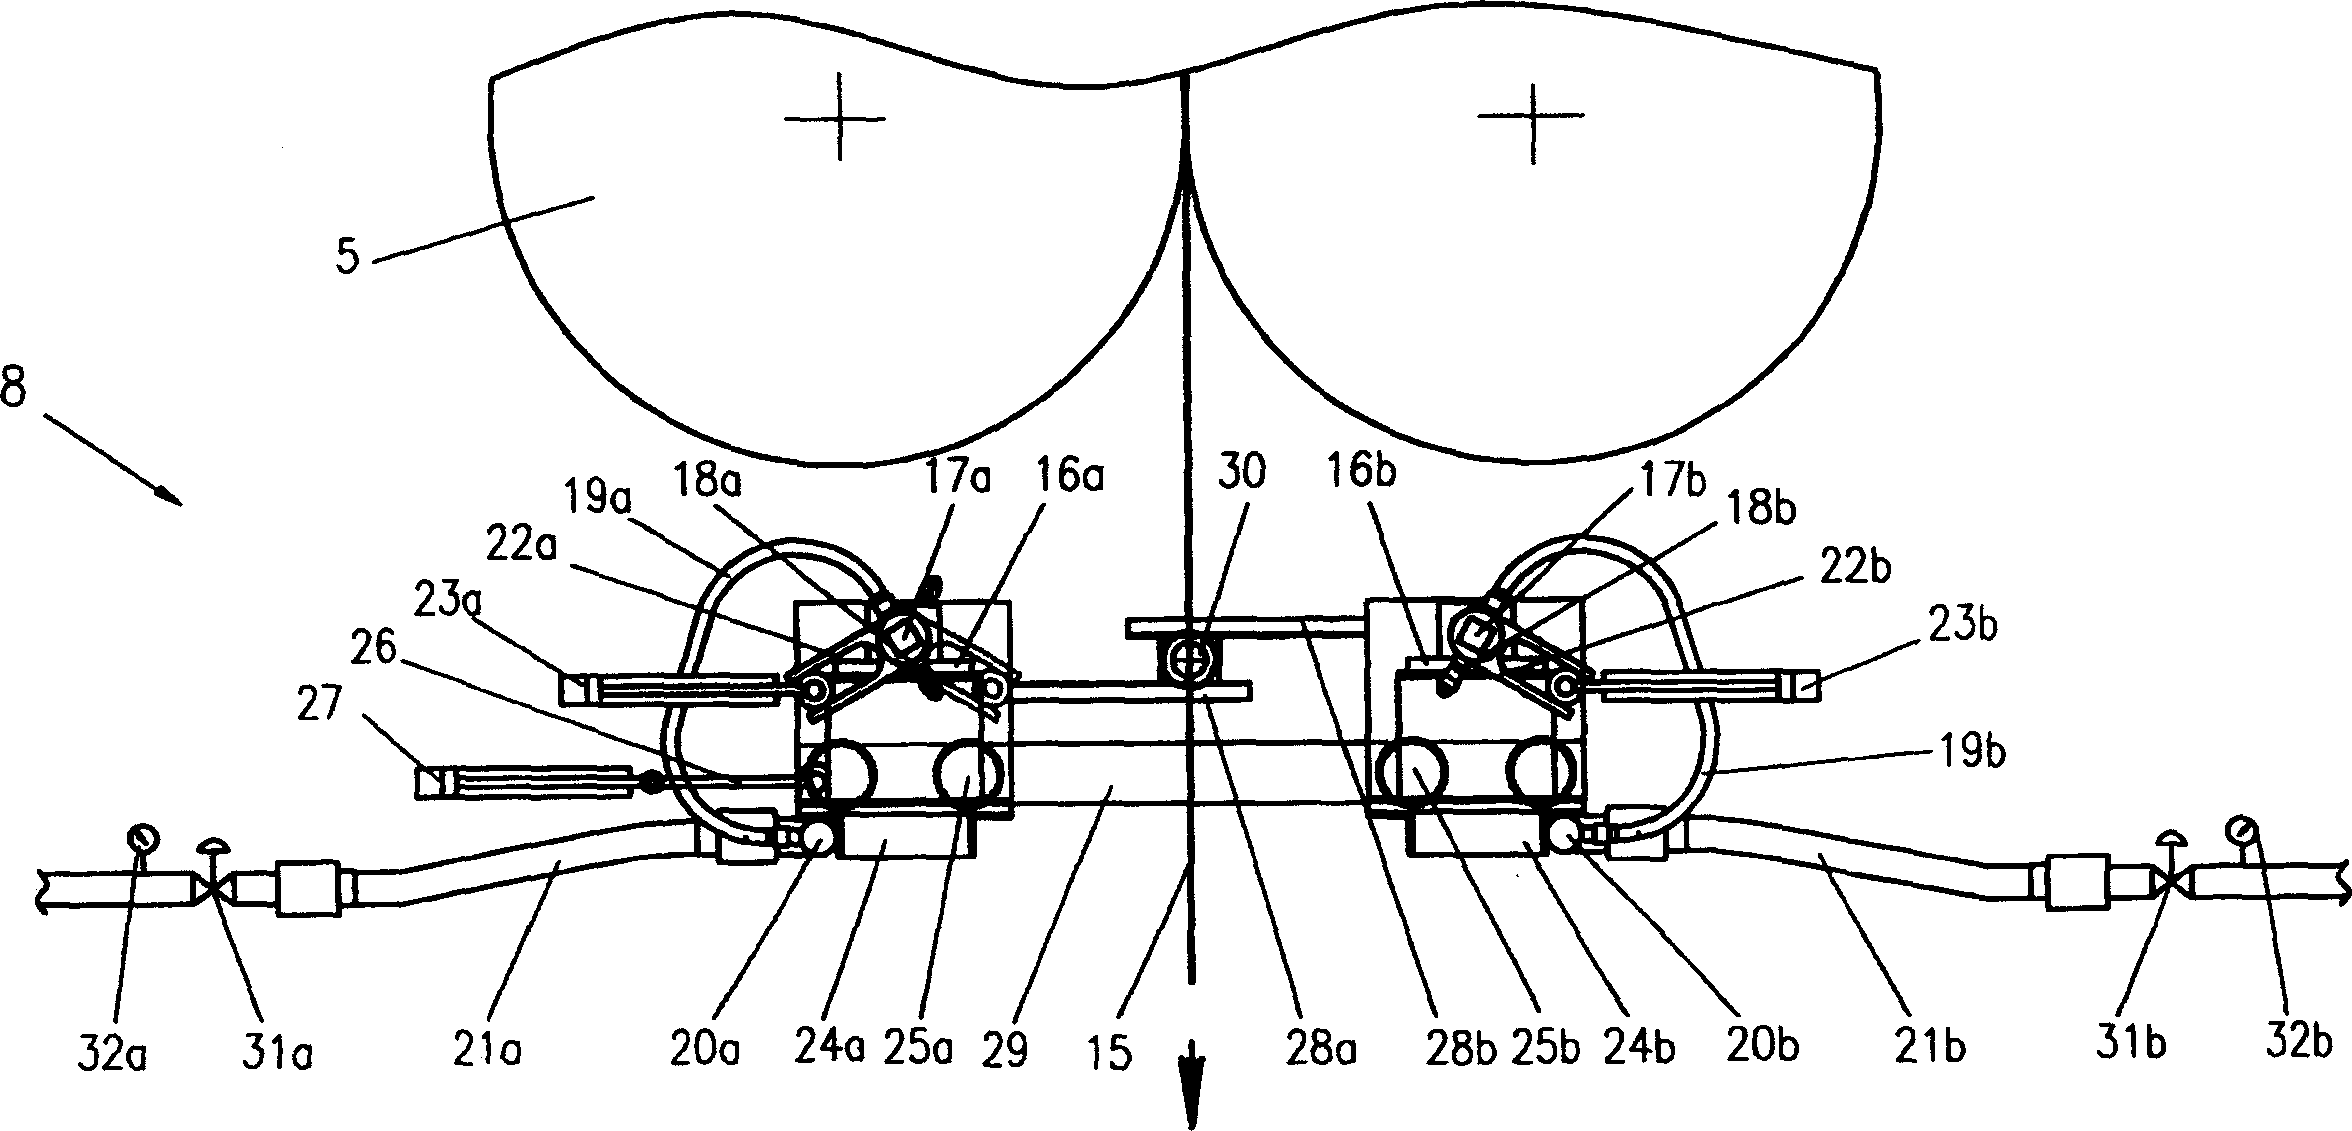 Thin-belt continuous casting method and apparatus